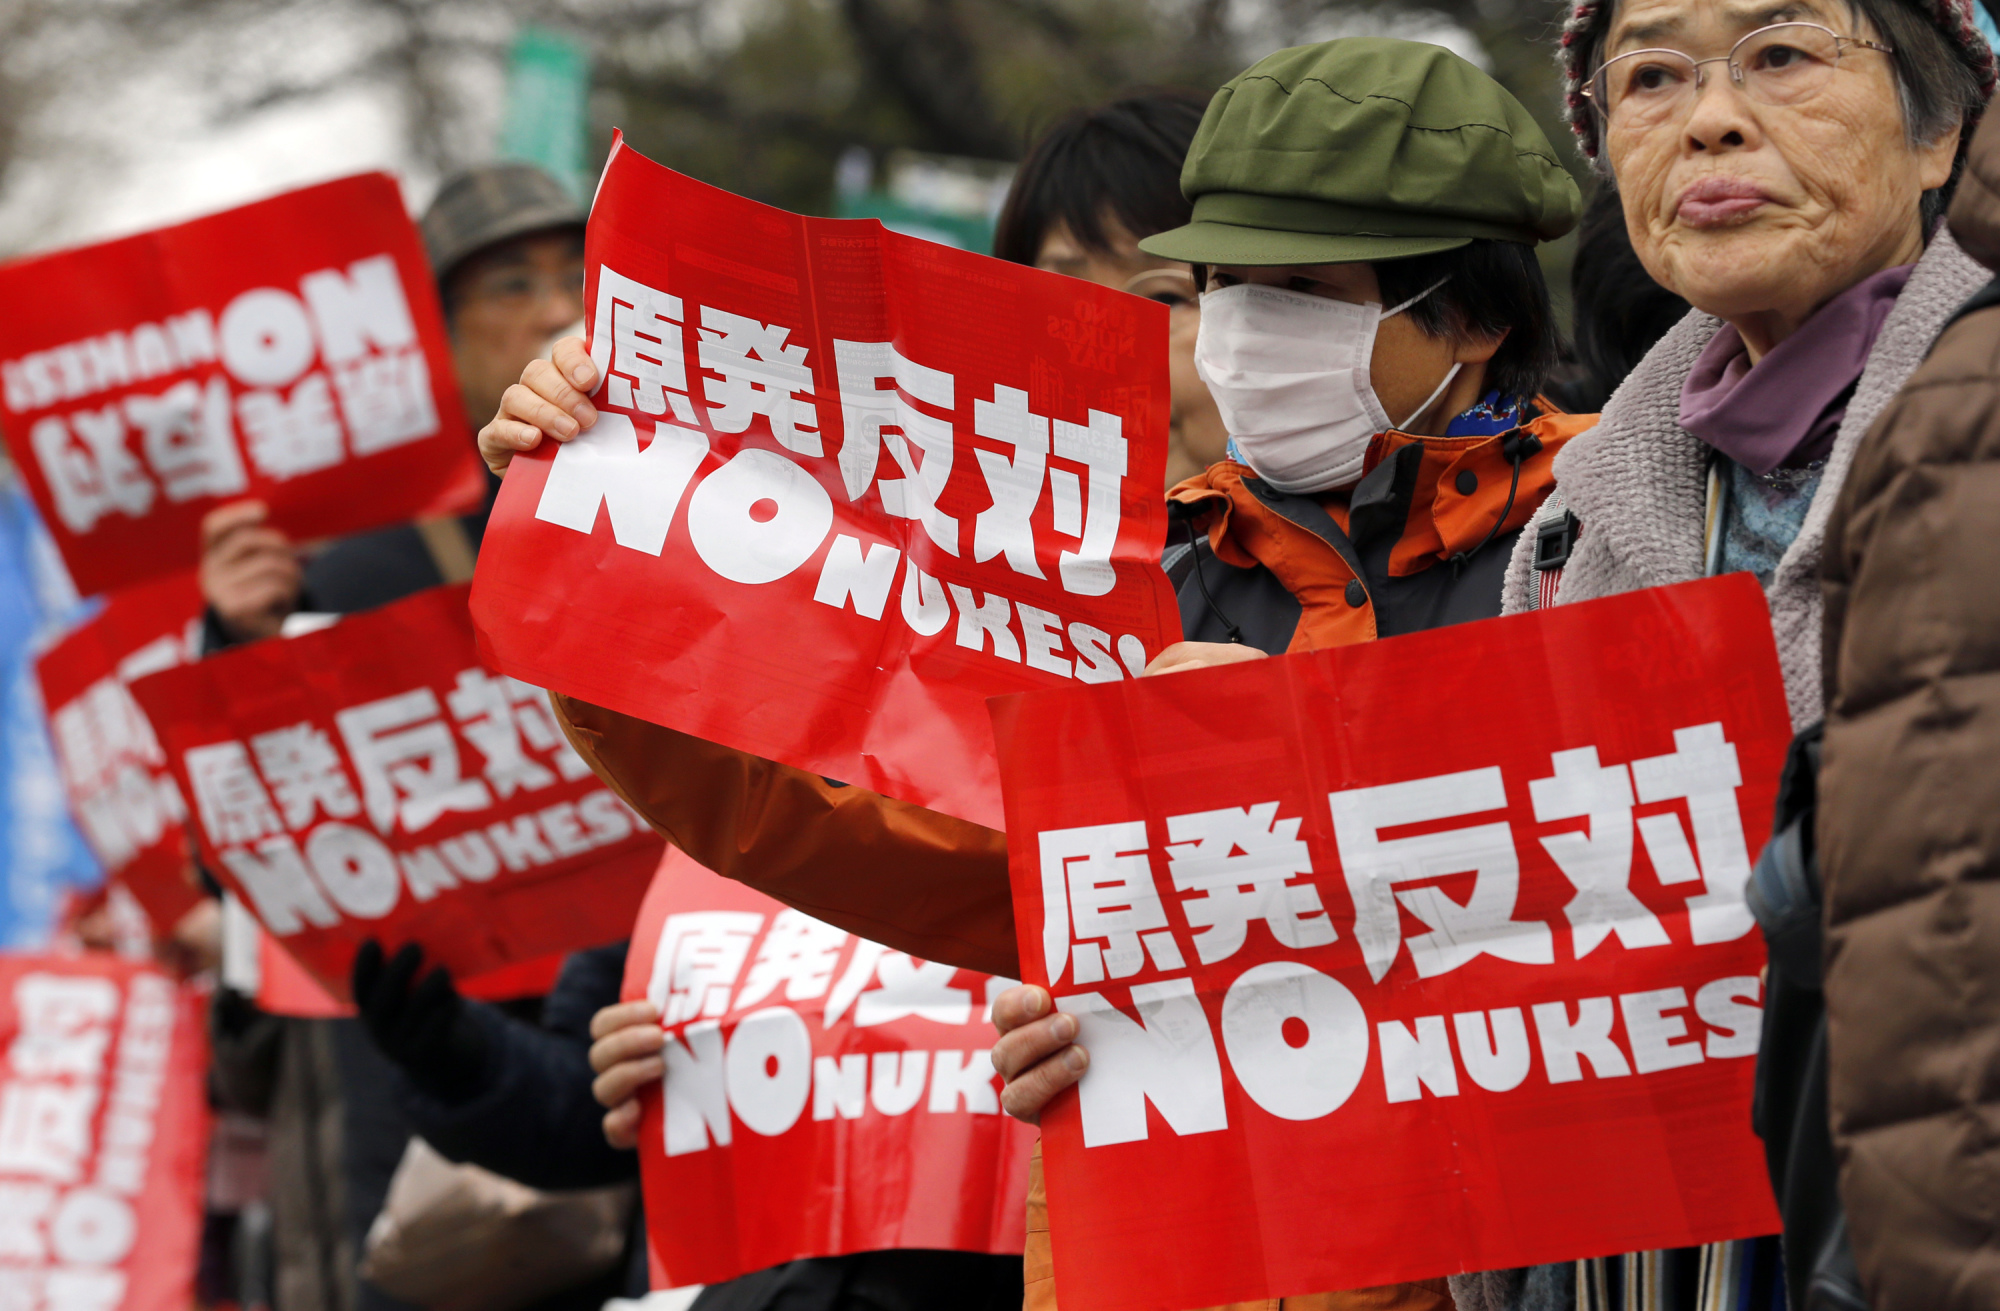 Anti-nuclear protesters hold placards in front of the Diet building in Tokyo last year. The majority of Japanese people remain opposed to restarting the nation's nuclear reactors in the wake of the Fukushima nuclear disaster. Only 5 percent of Japanese surveyed in a poll last year said they would like to see Japan become a nuclear weapons power. | AP